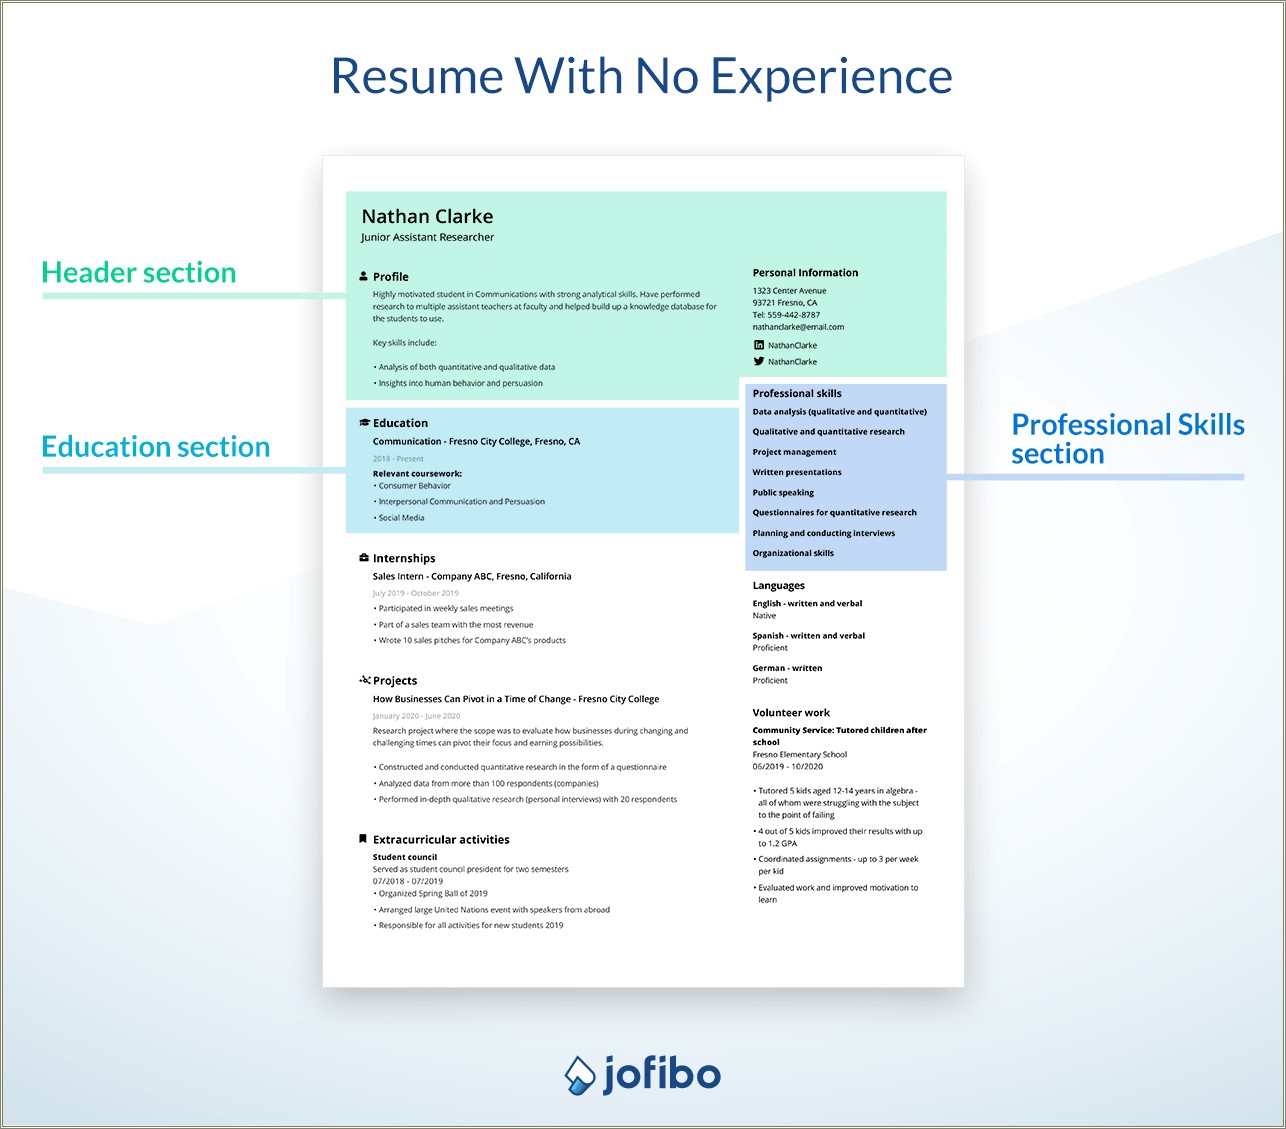 Resume Core Qualifications For No Experience